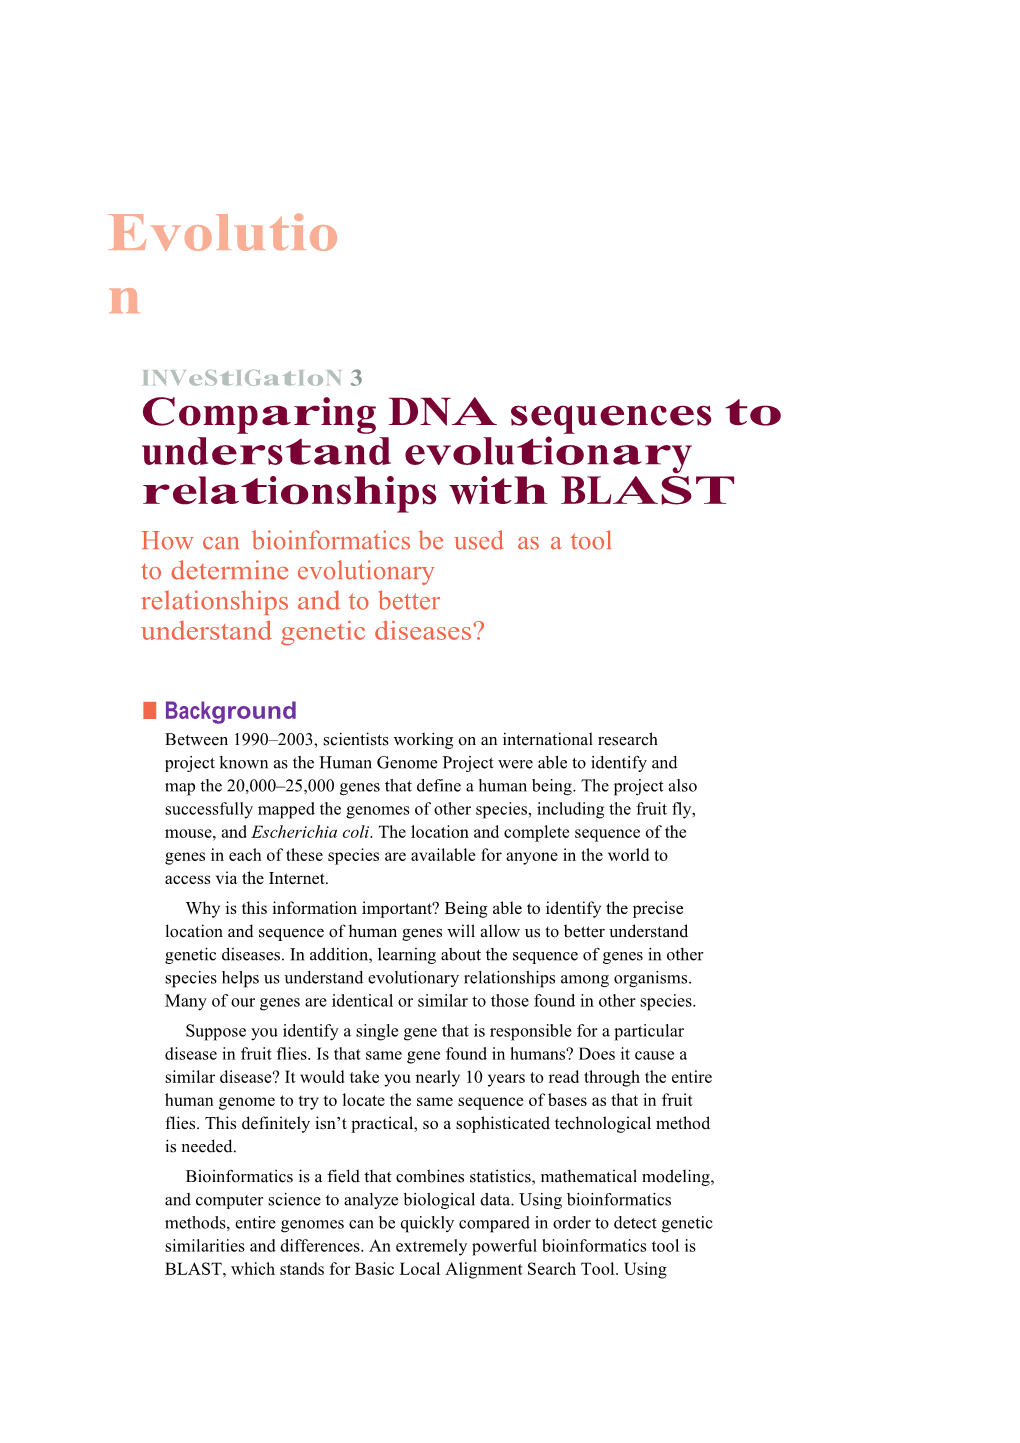 Comparing DNA Sequences to Understand Evolutionary Relationships with BLAST